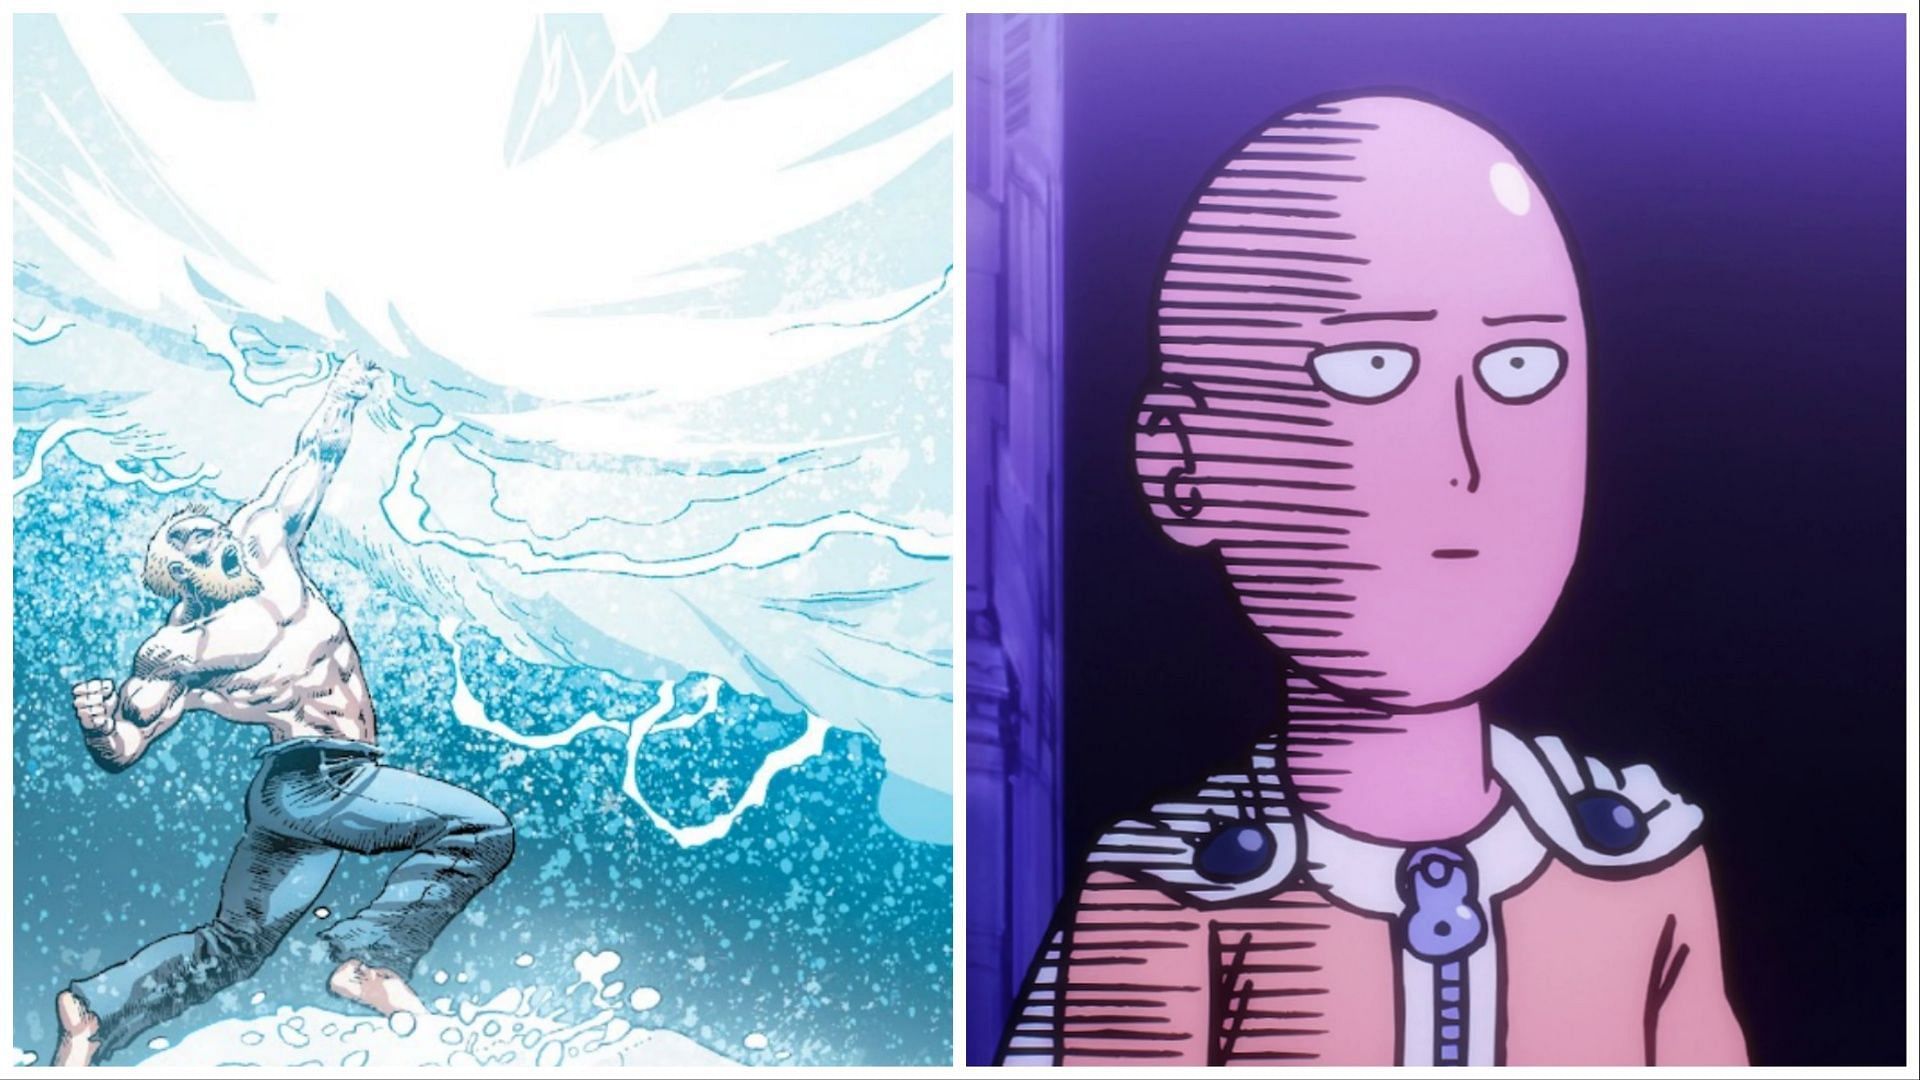 Comparing Saitama with Thor, the God of Fists (Images via Madhouse and Marvel)